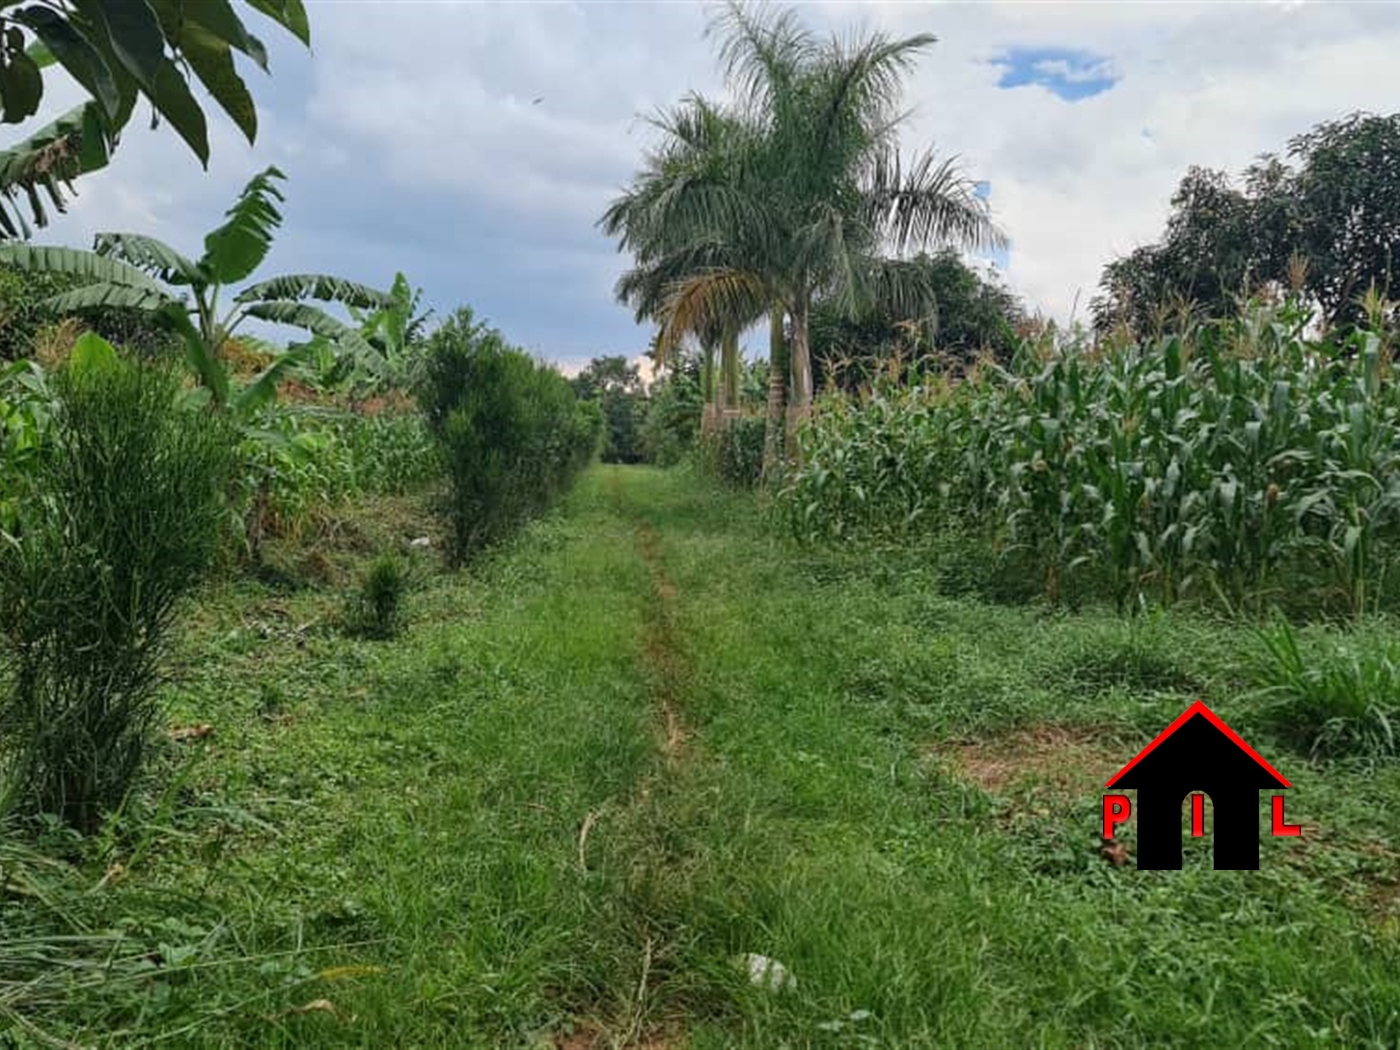 Commercial Land for sale in Namayumba Mukono